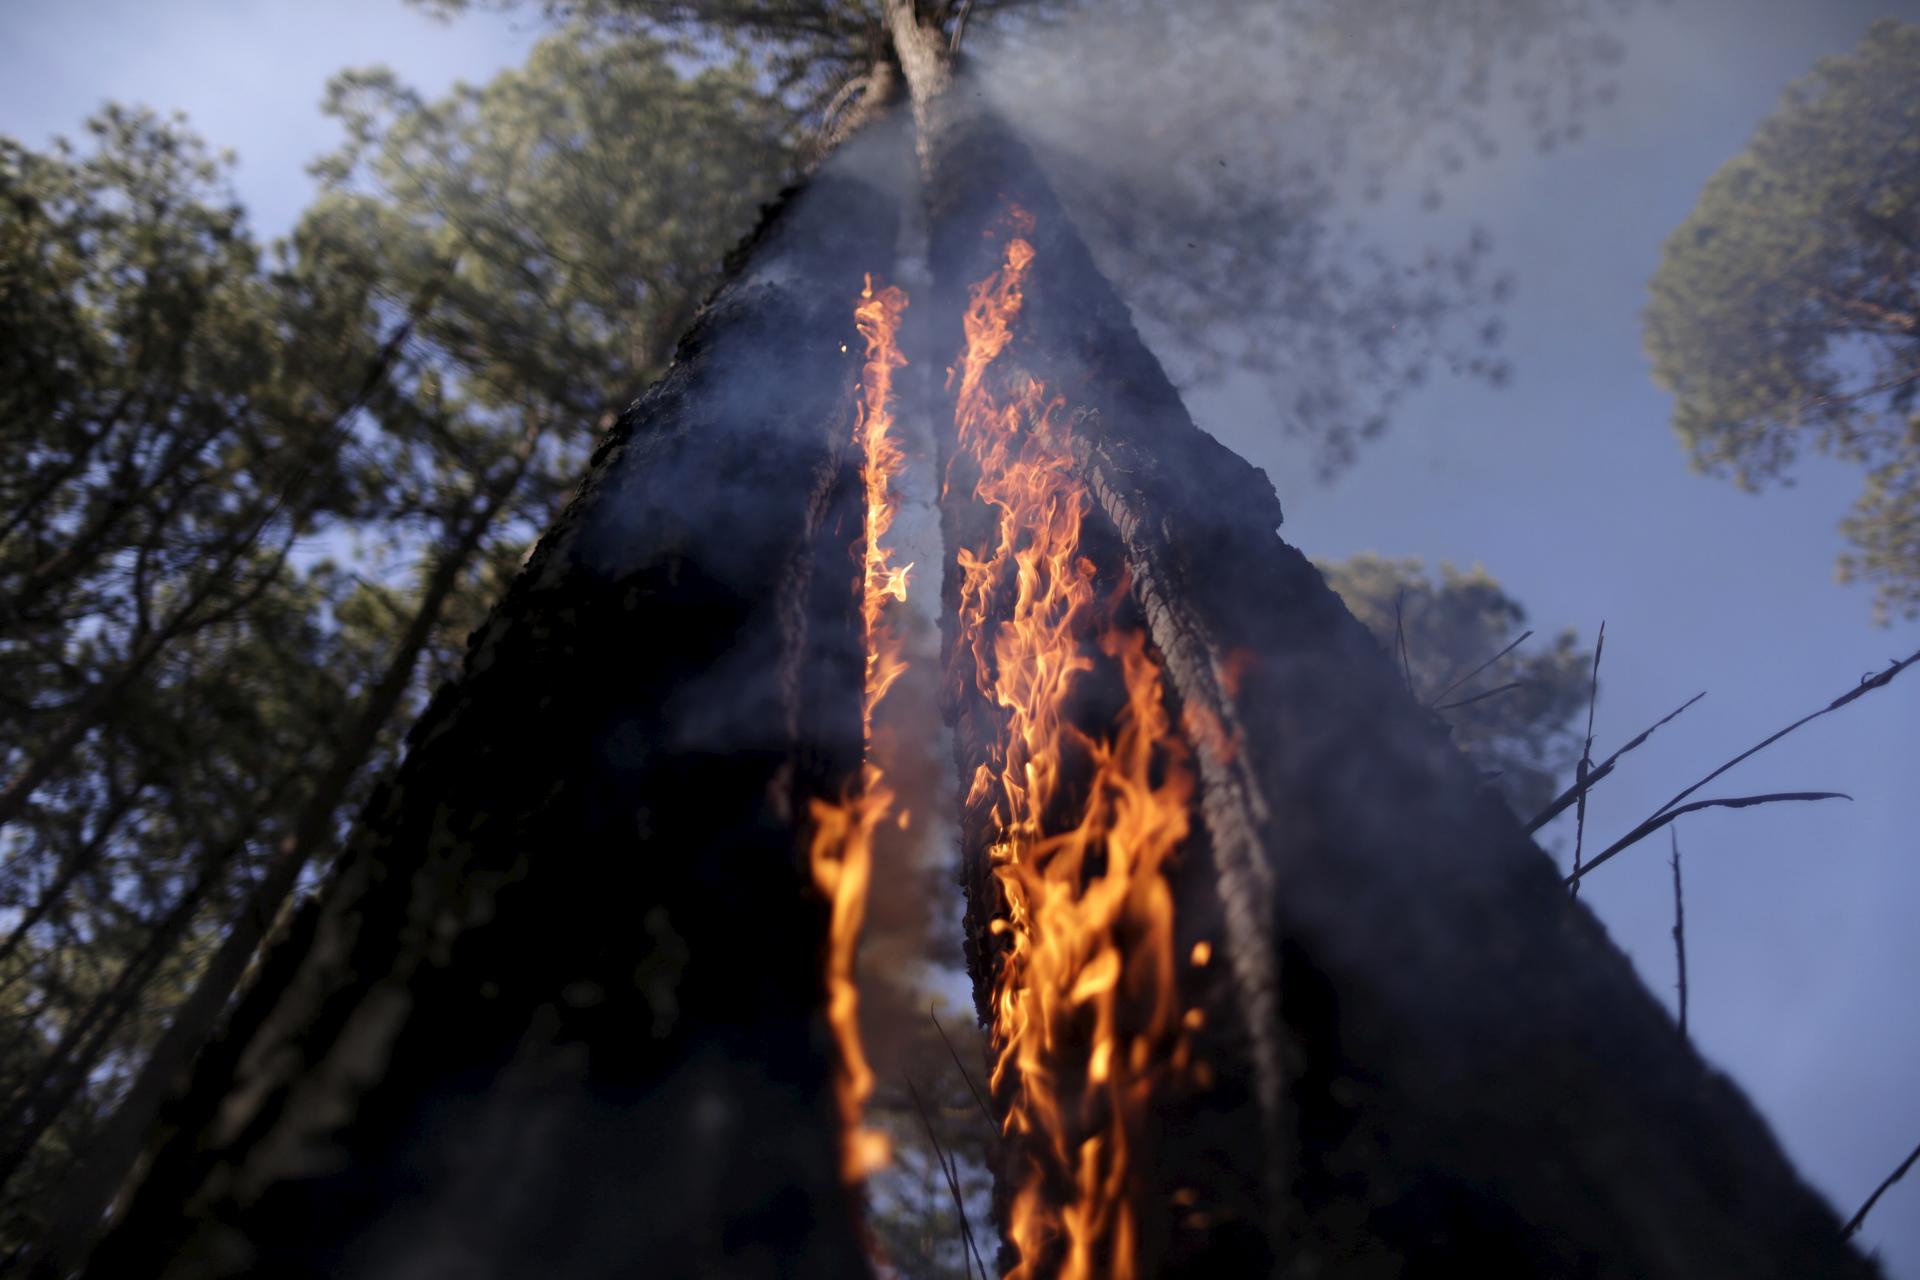 A tree on fire is seen as wildfires blaze near the Paranoa neighborhood in Brasilia July 29, 2015. Drought, high temperatures and low humidity in areas have caused wildfires to start in several places in Brasilia, according to officials.